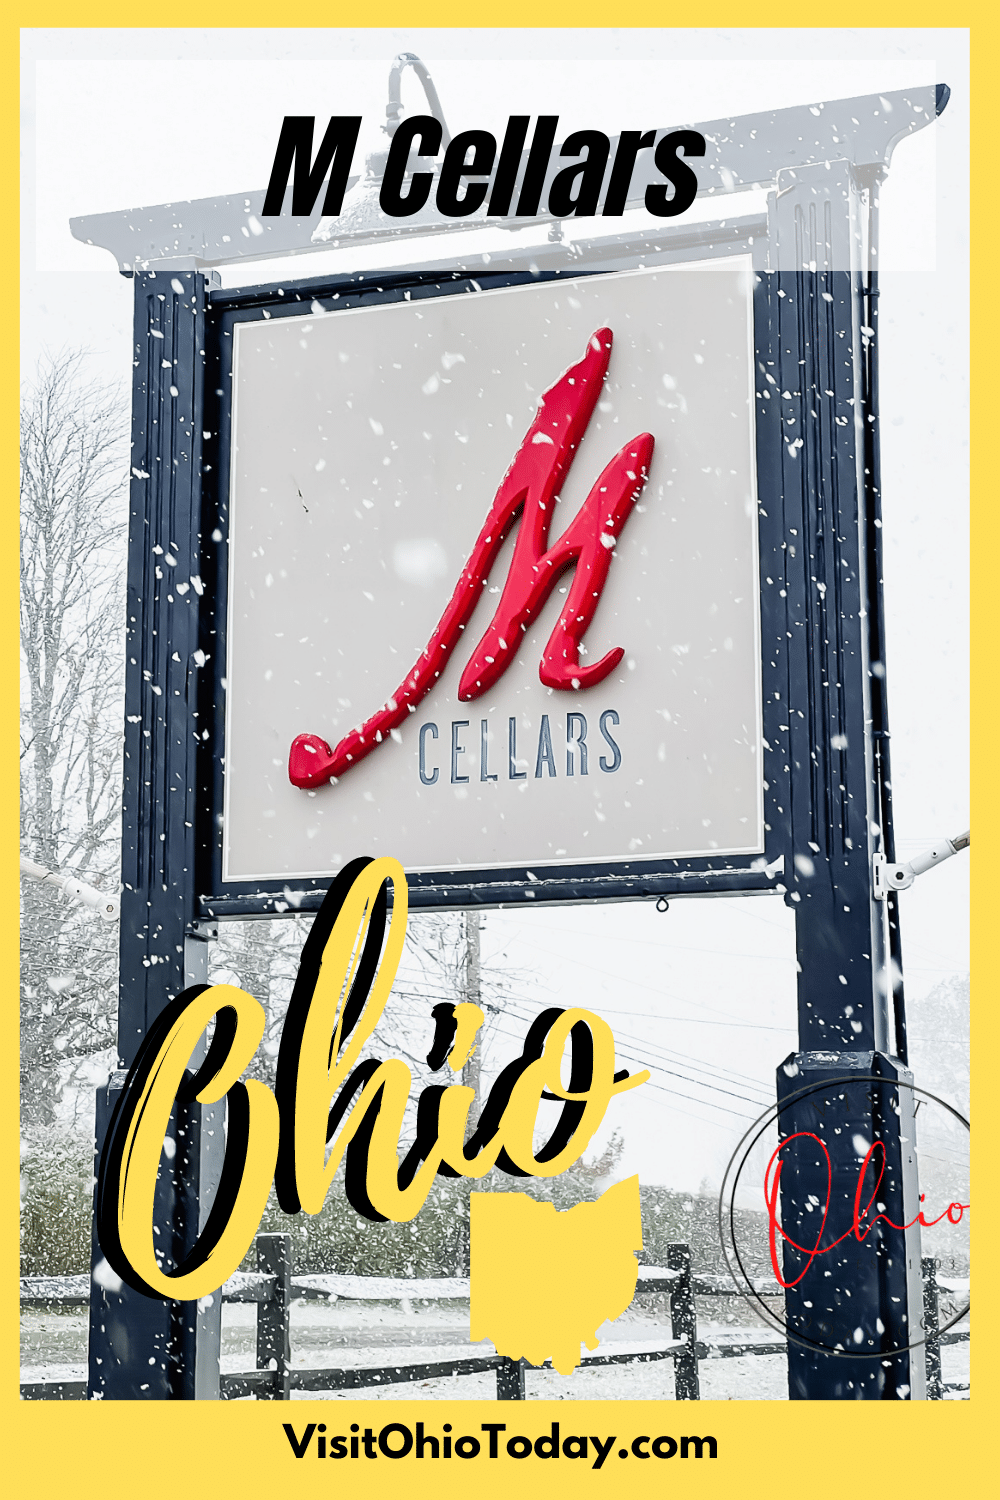 snowy weather and snow flakes on top of the M Cellars black, white and red sign